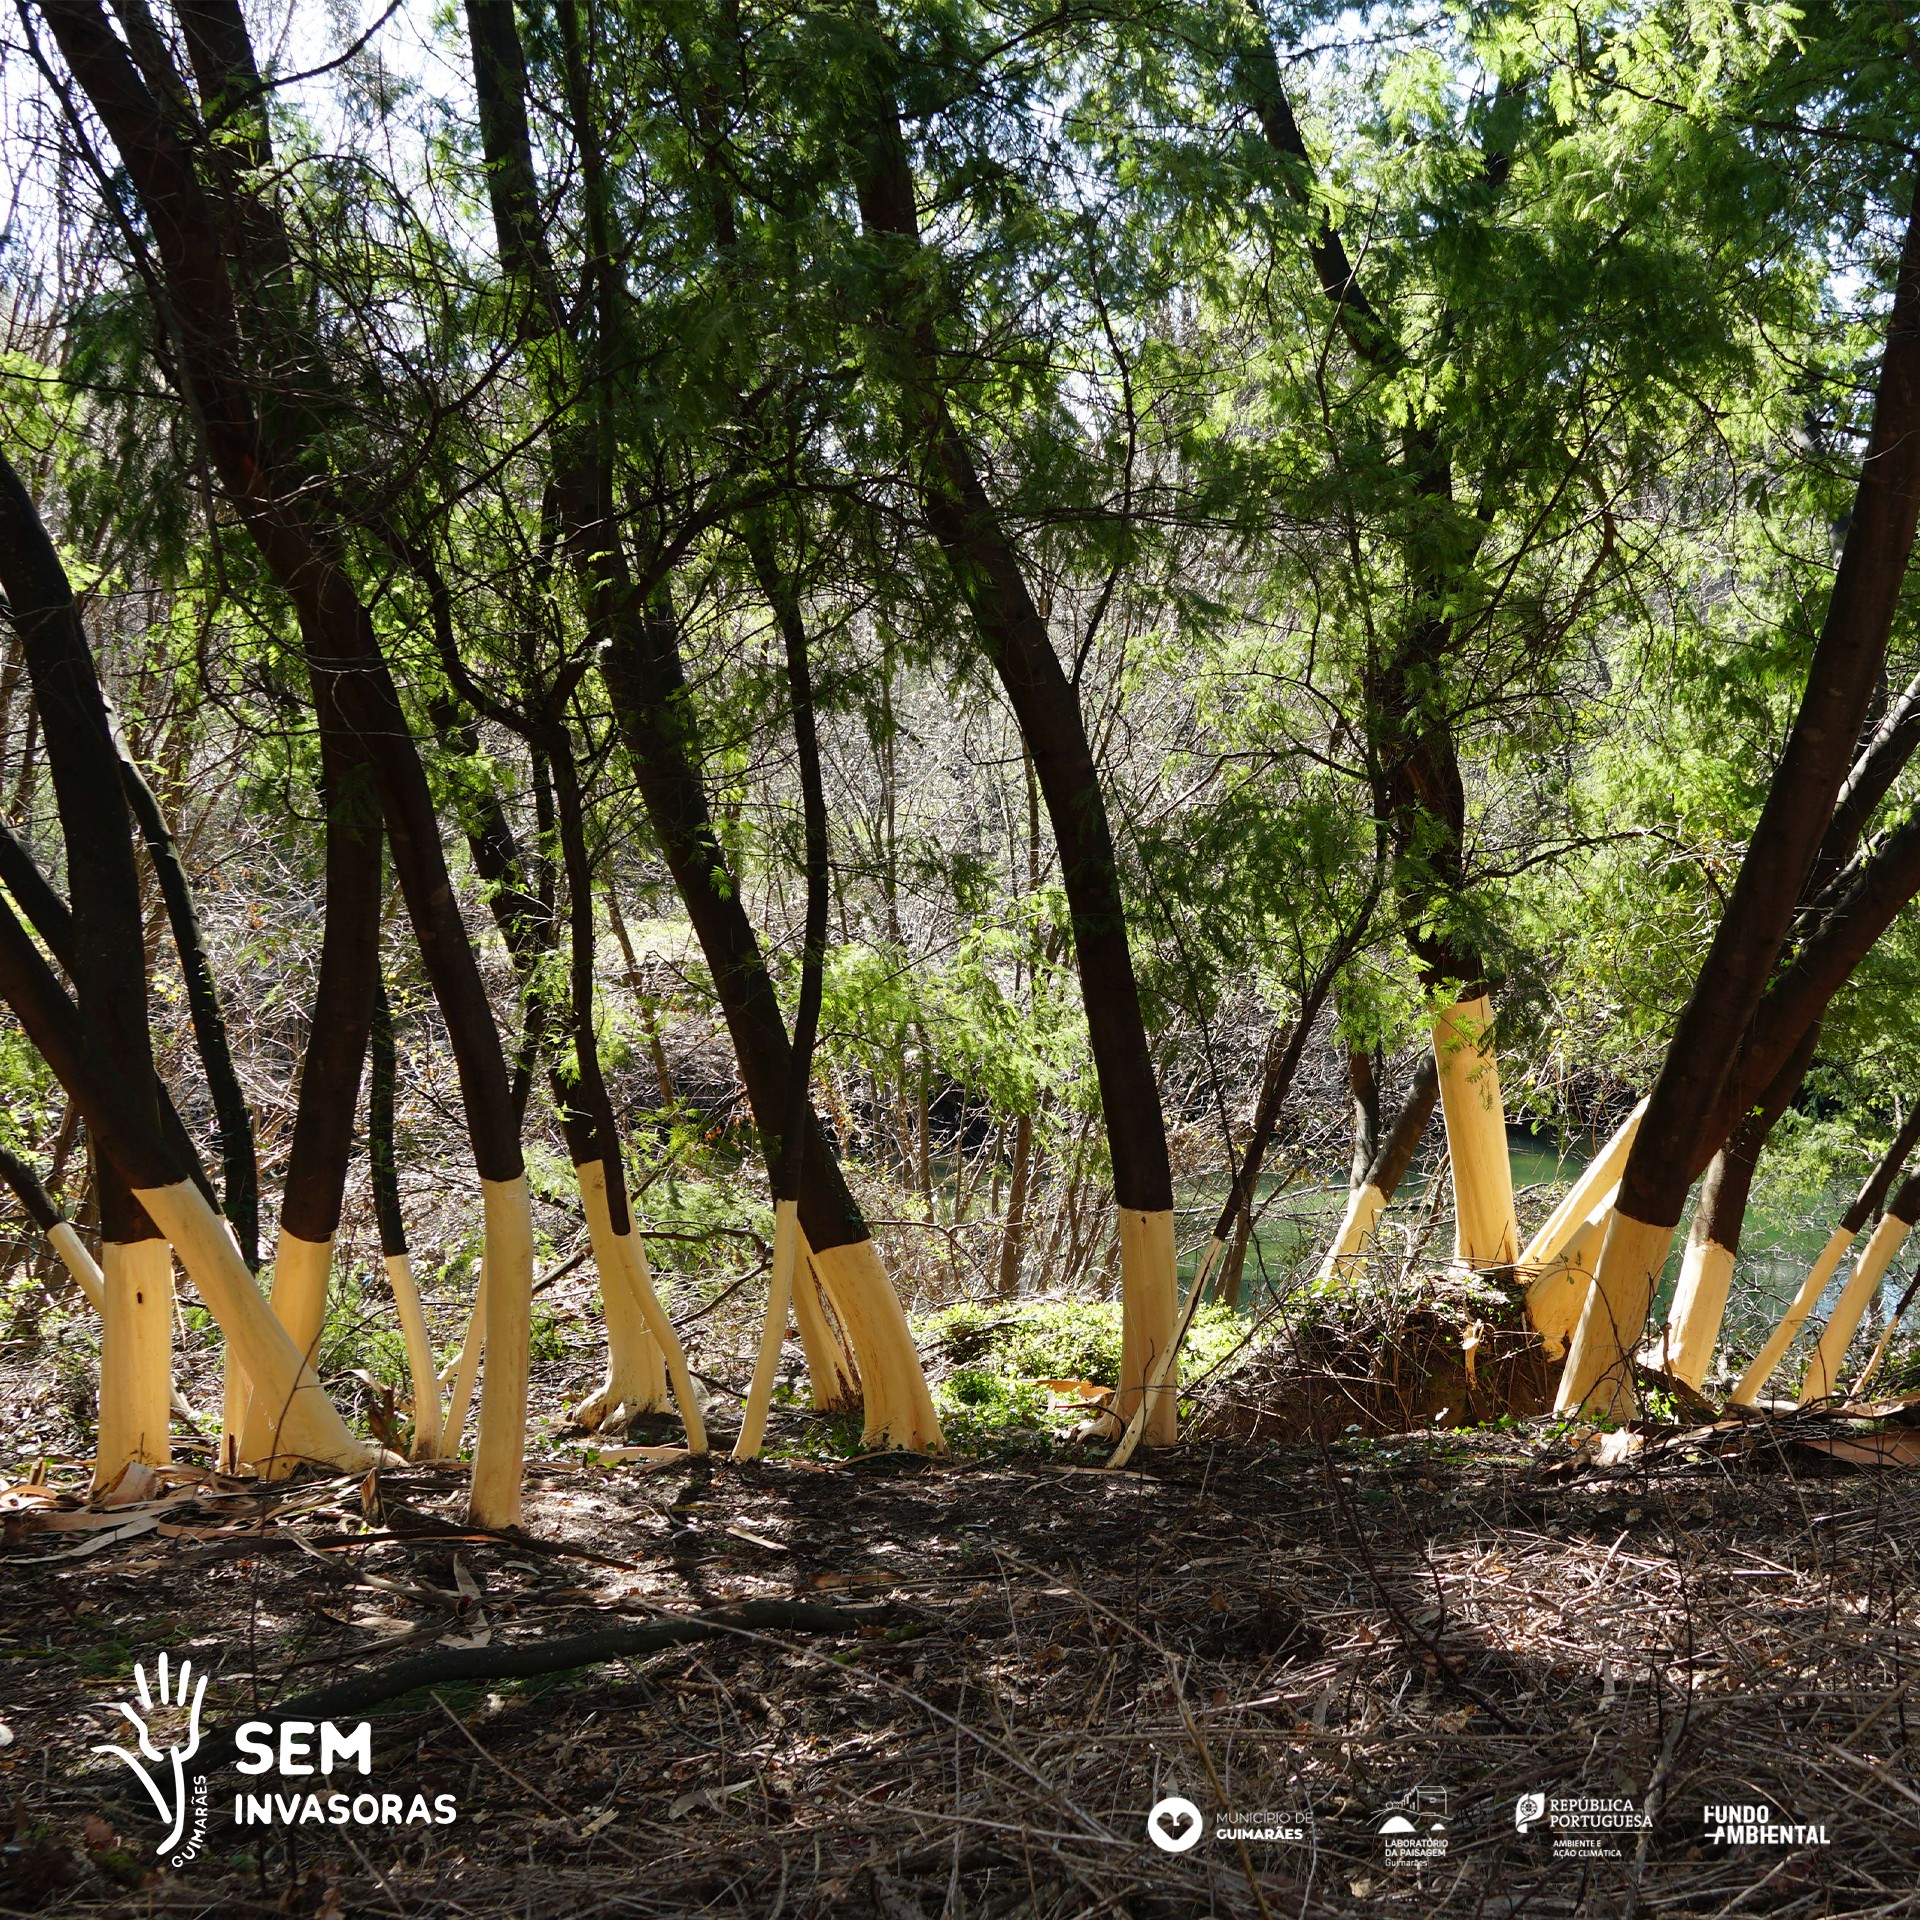 A picture of a row of the bases of young trees all wrapped with yellow